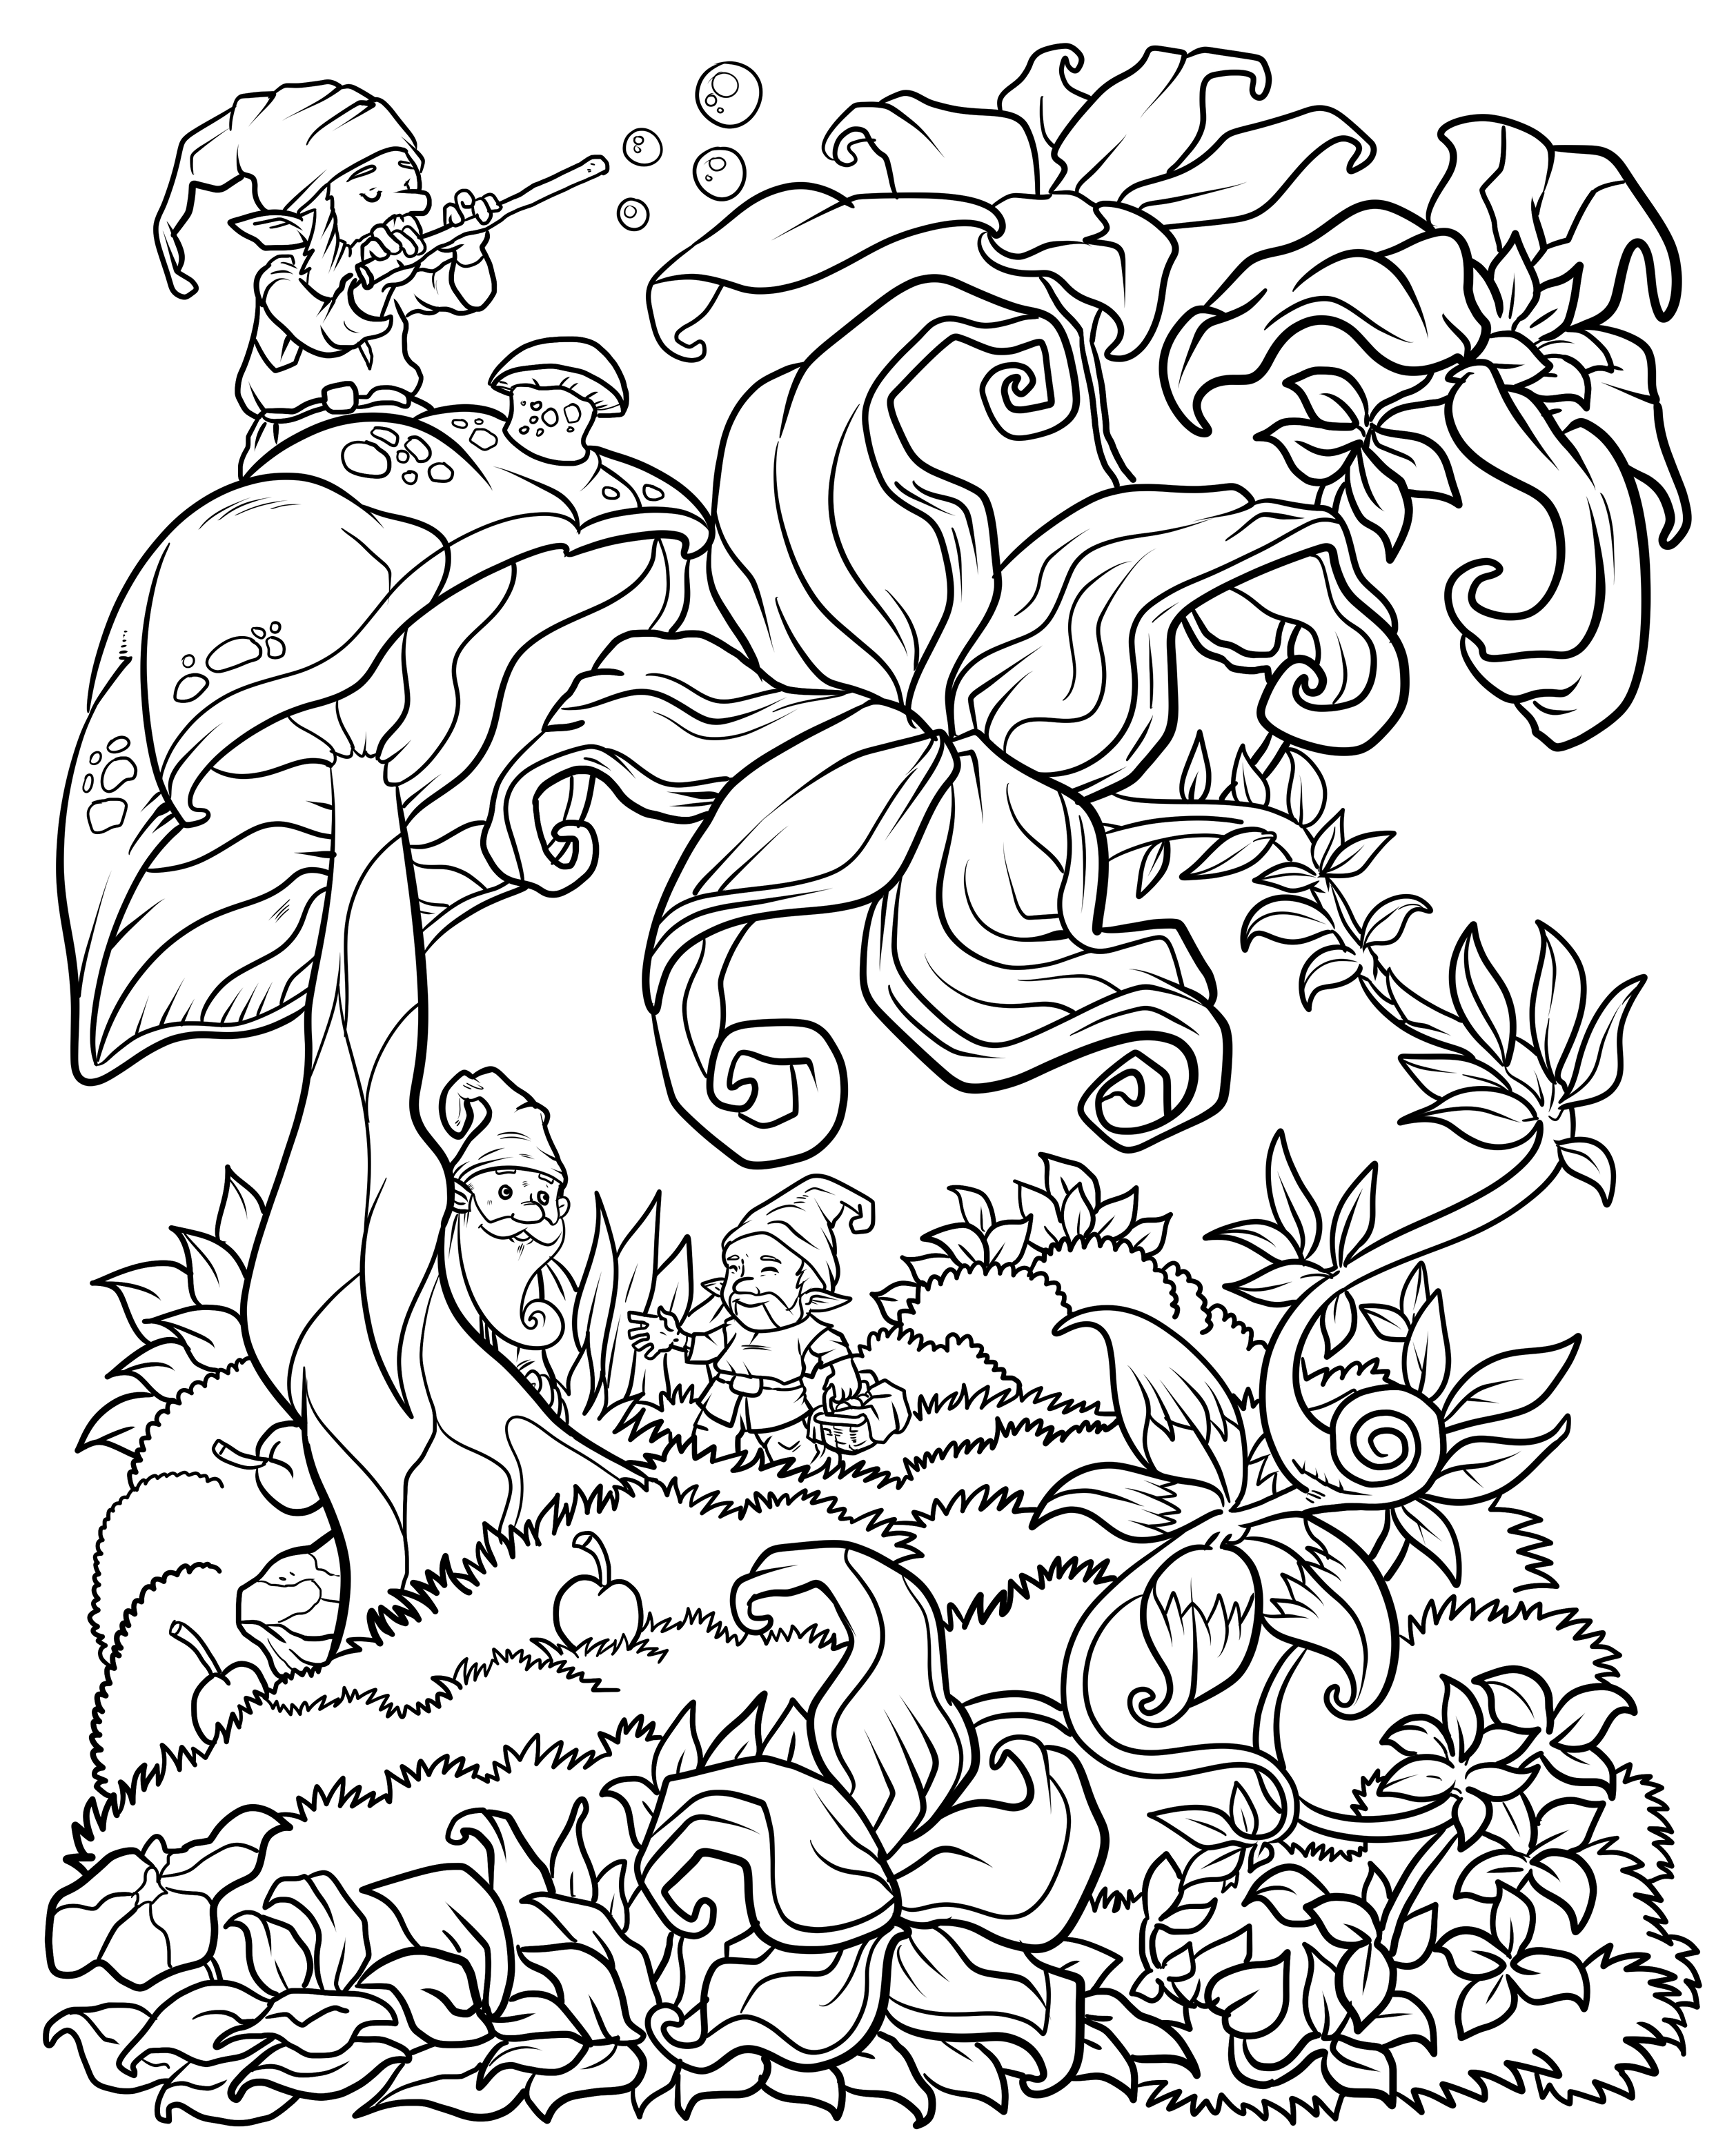 11 free printable adult coloring pages - free printable abstract ...